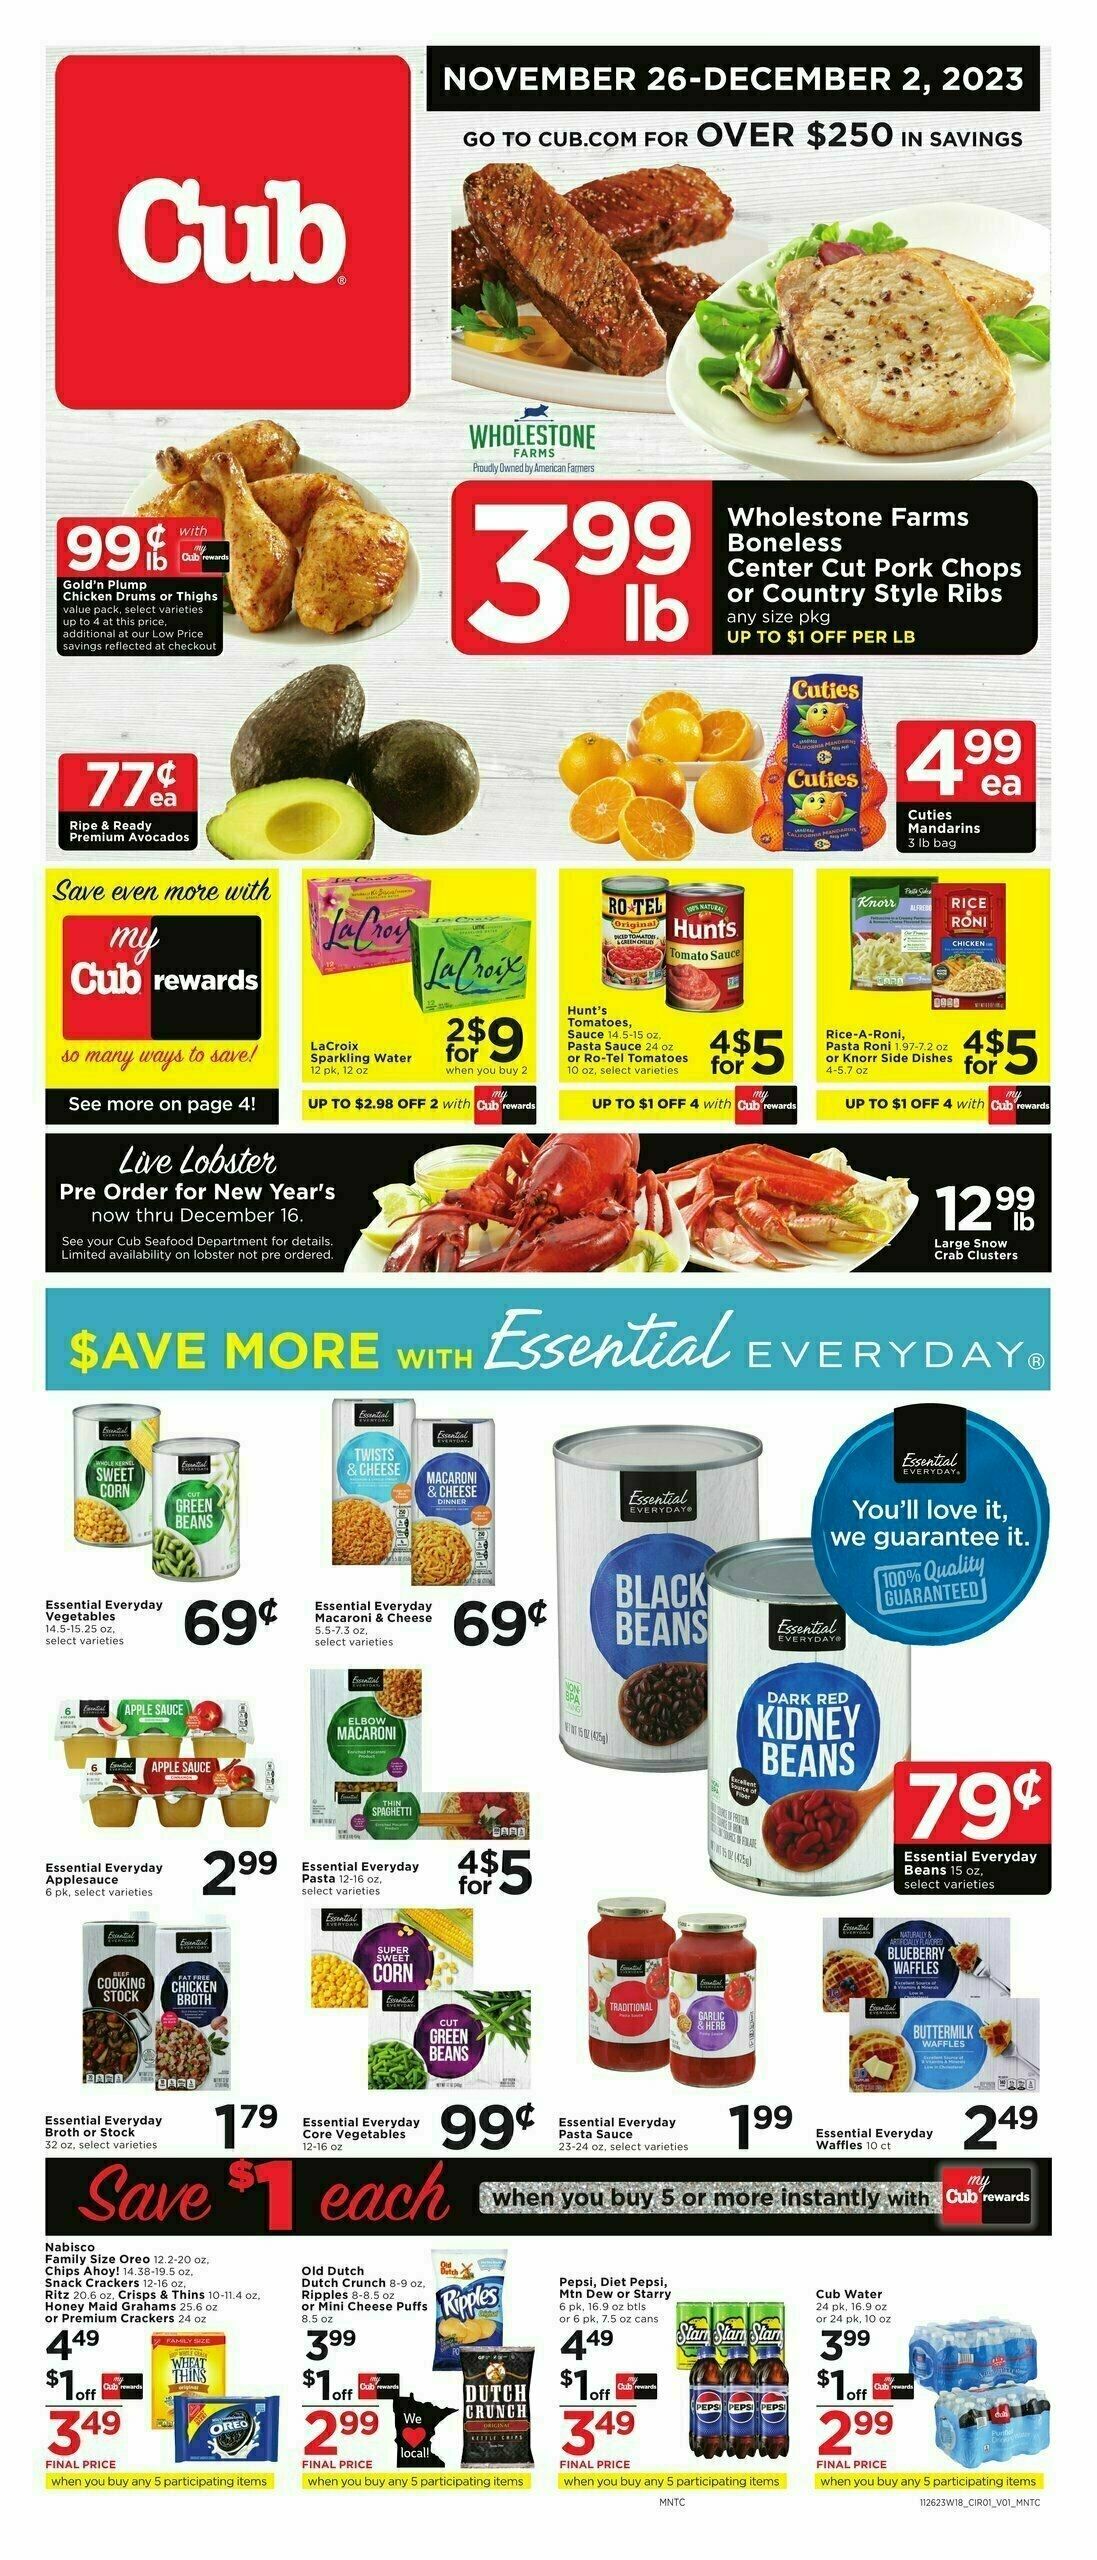 Cub Foods Holiday to the Max! Weekly Ad from November 26